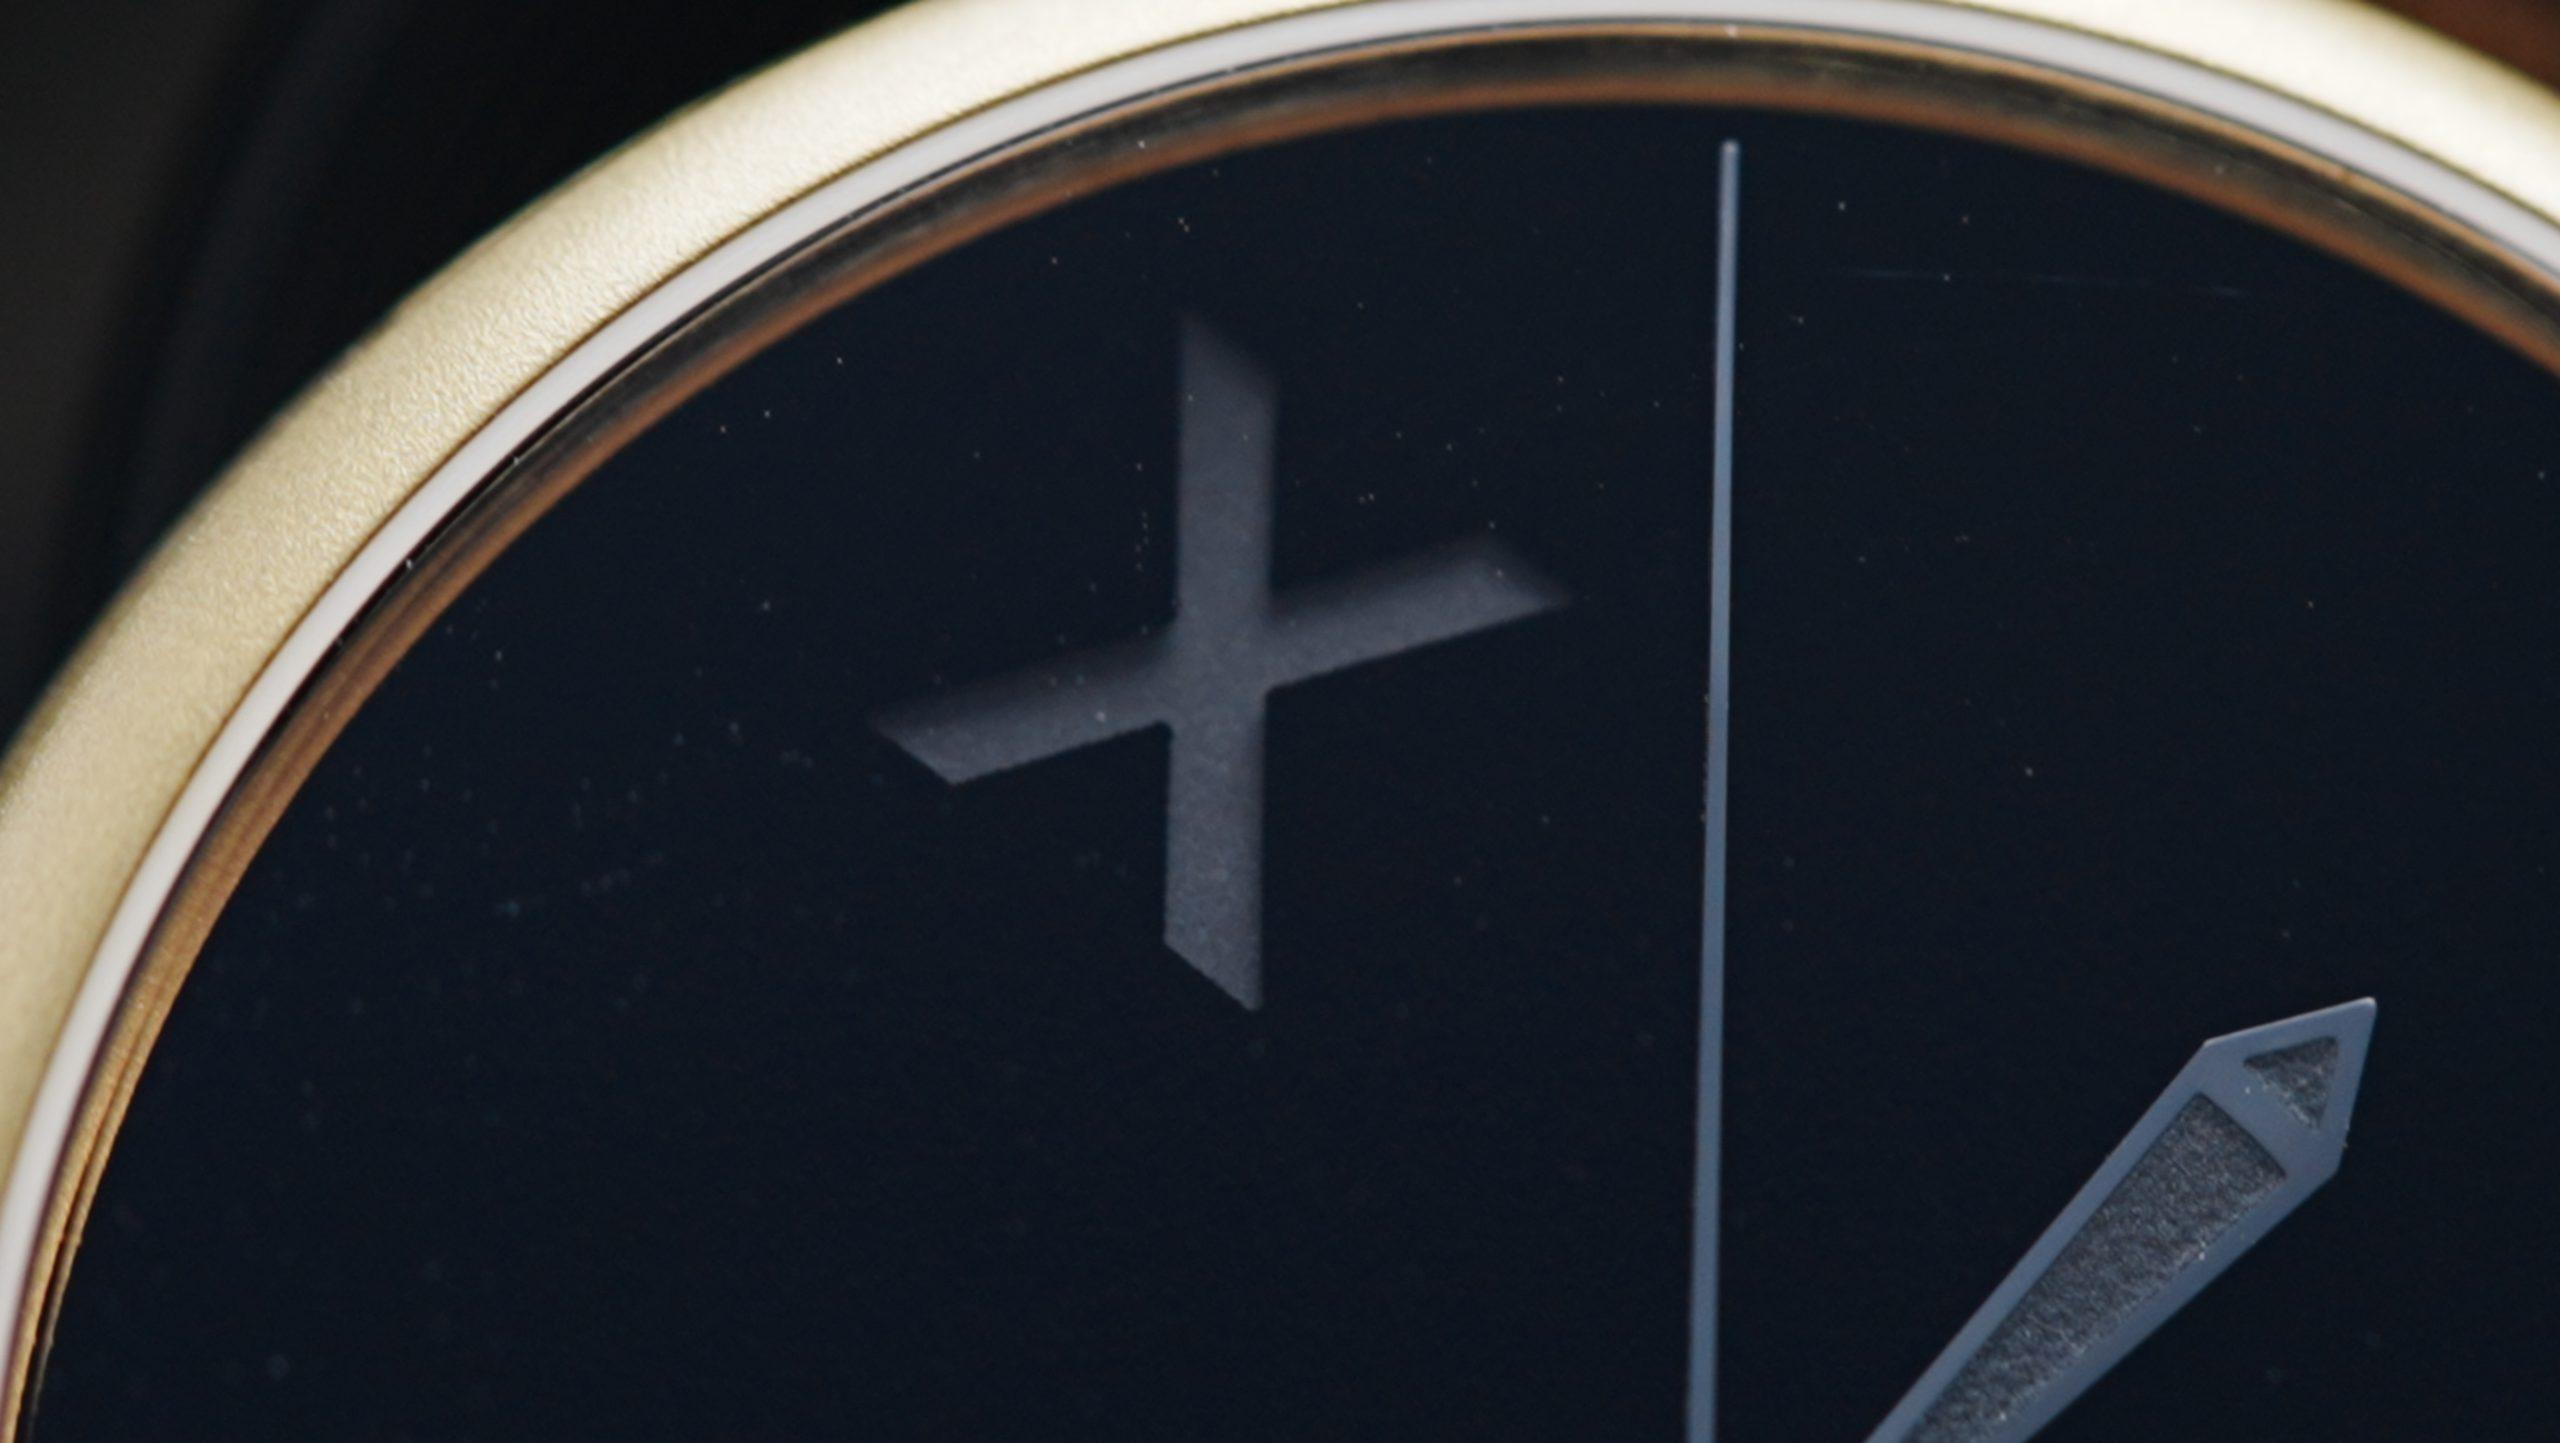 H.Moser & Cie. Confidential Project X Concept Vanta Black dial zoomed in on the mystery "X".